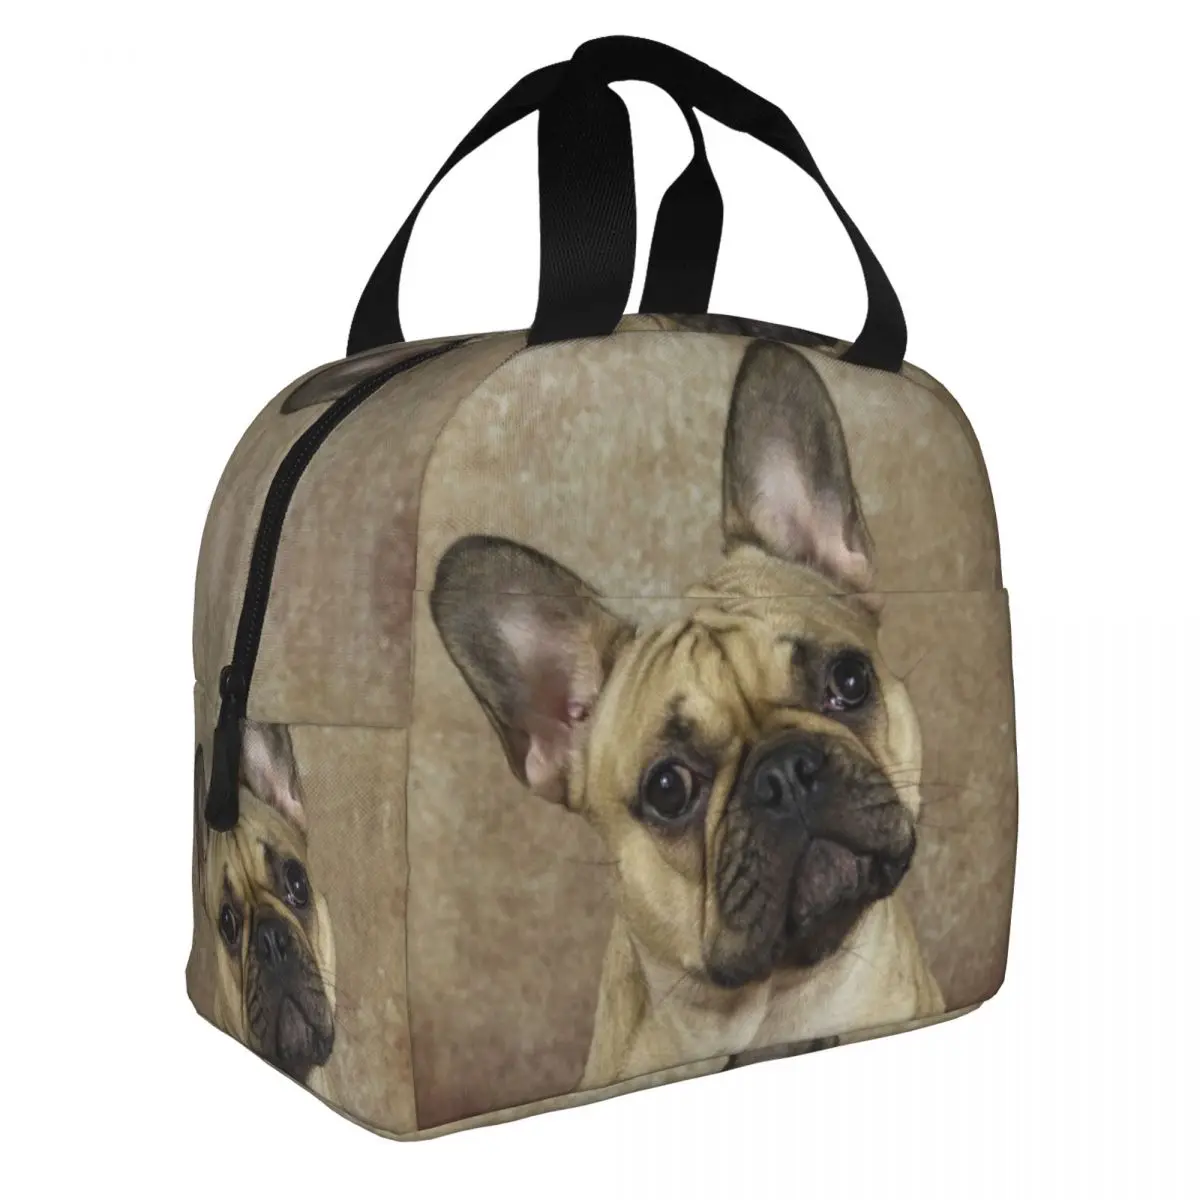 French Bulldog Thermal Insulated Lunch Bag Women Kids Resuable Pet Dog Lunch Box for School Office Work Picnic Food Tote Bags